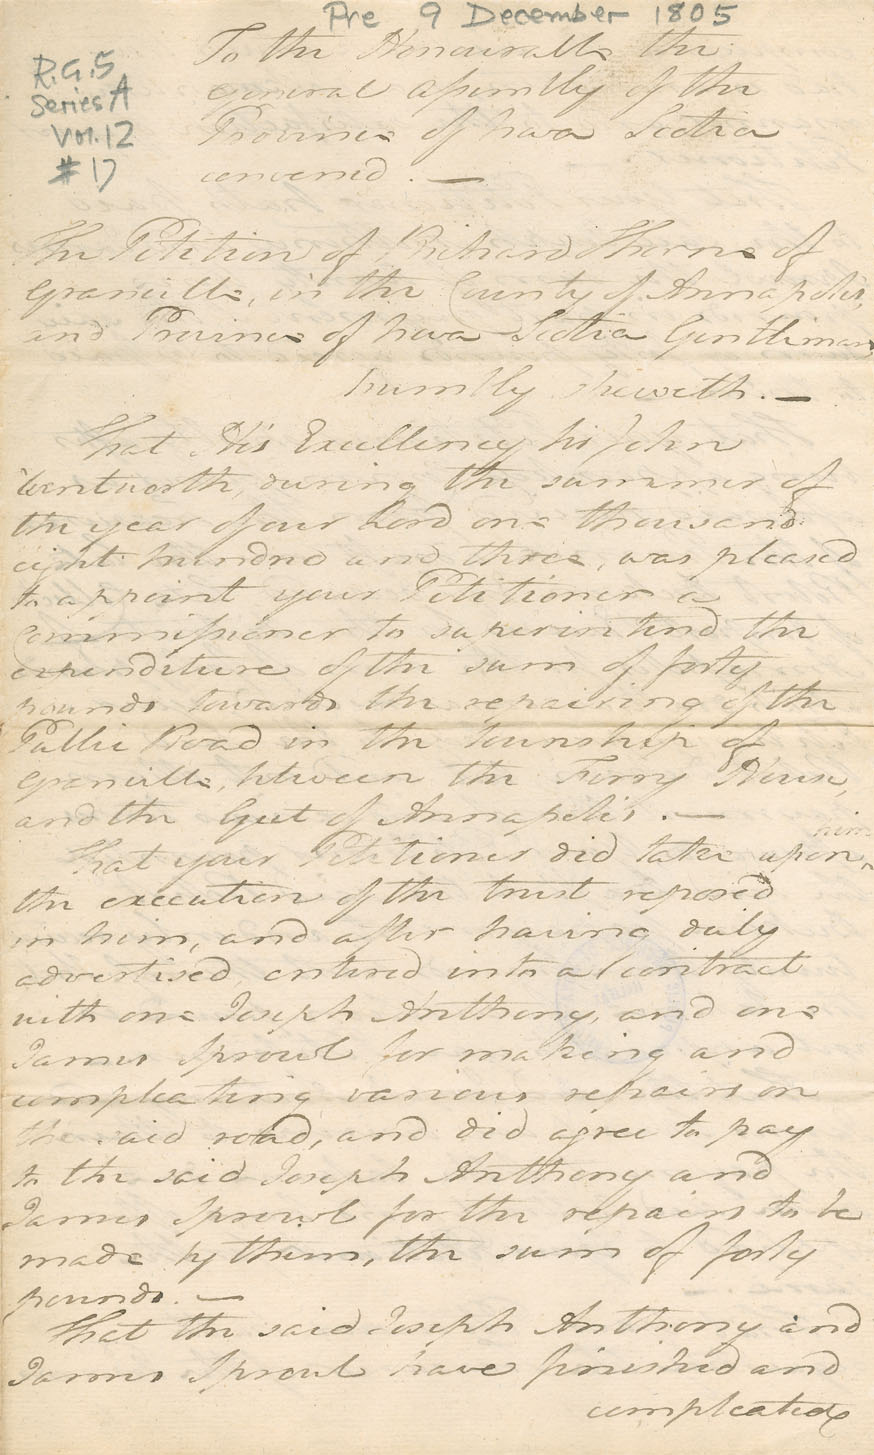 assembly : Petition of Richard Thorne of Granville, stating his services as commissioner for repairing the public road between the Ferry House and the 